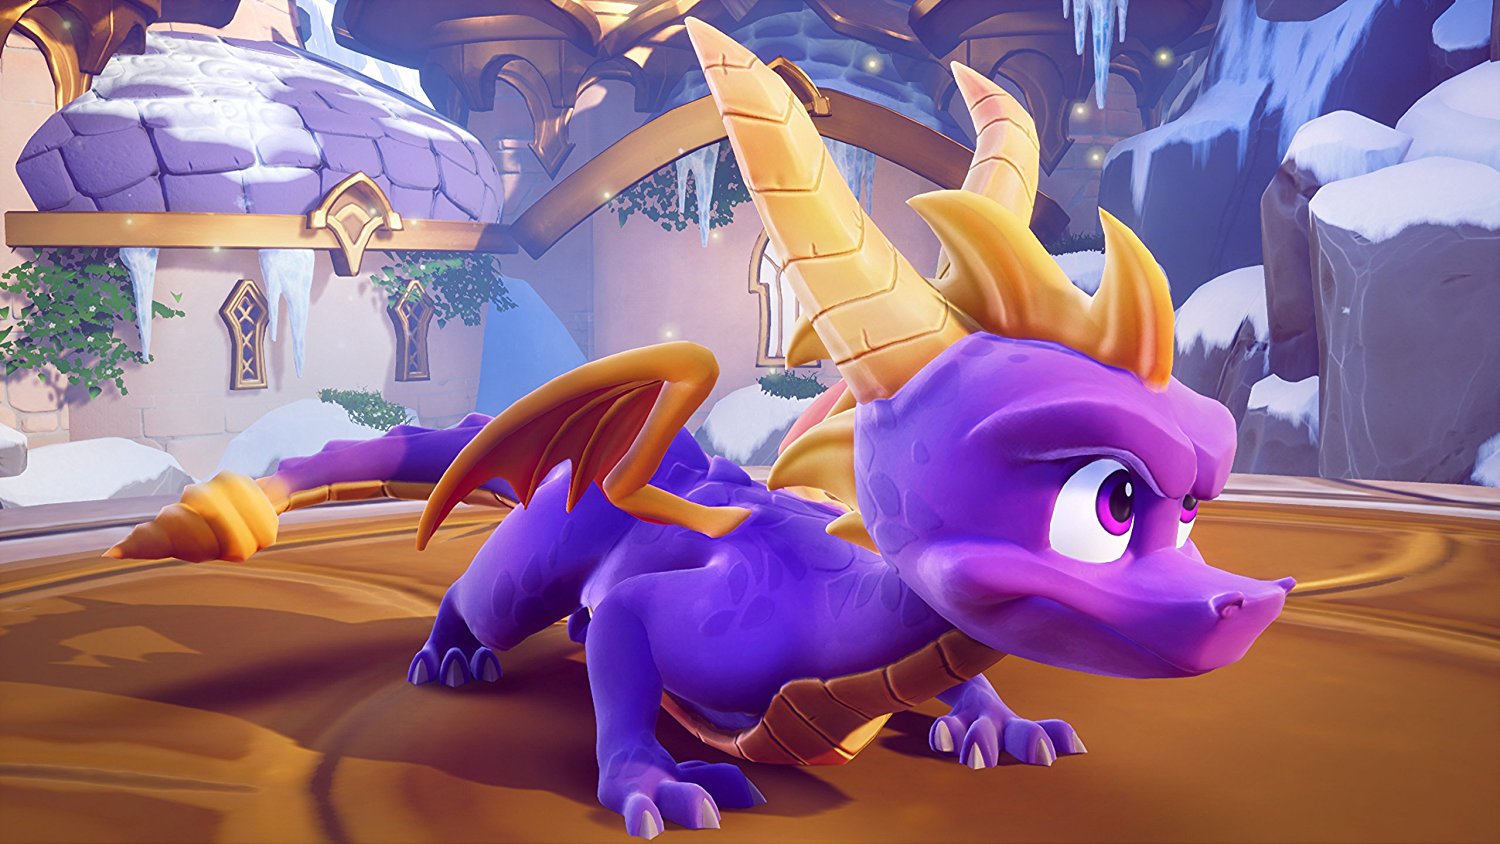 [Rumor] GameStop lists Spyro Reignited Trilogy for Switch